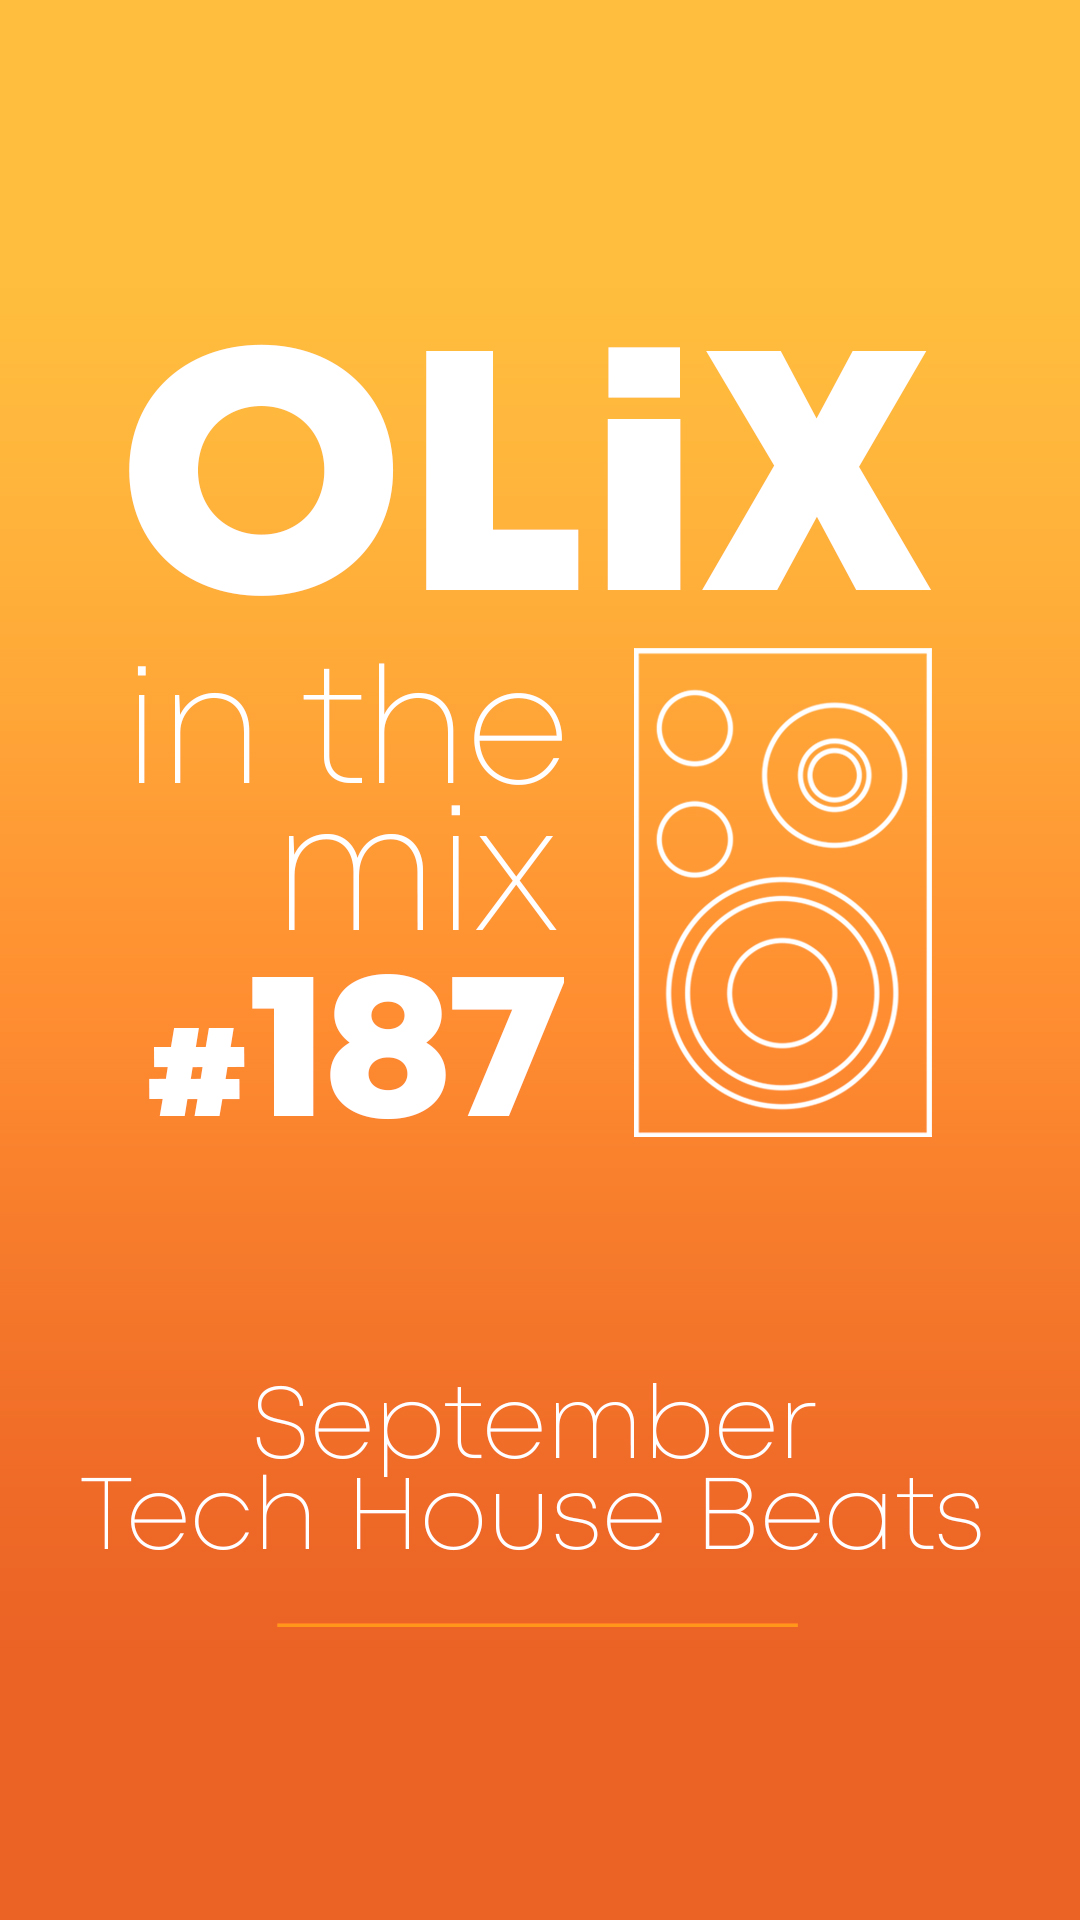 OLiX in the Mix - 187 - September Tech House Beats